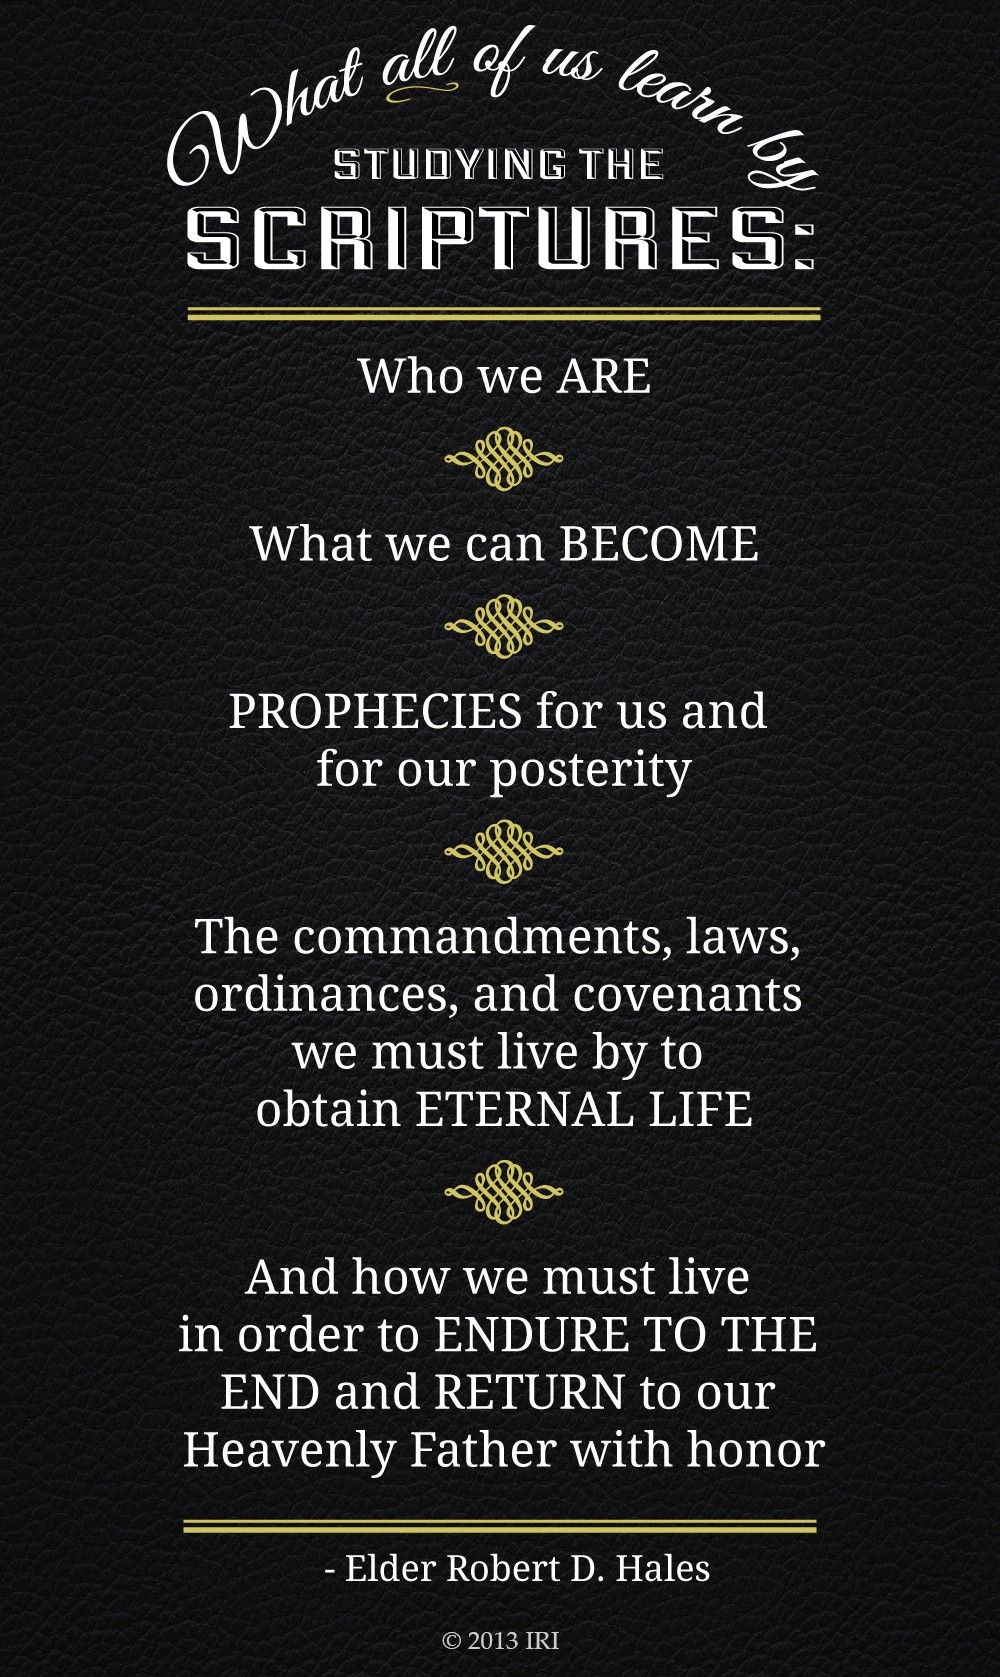 “What all of us learn by studying the scriptures: Who we are. What we can become. Prophecies for us and for our posterity. The commandments, laws, ordinances, and covenants we must live by to obtain eternal life. And how we must live in order to endure to the end and return to our Heavenly Father with honor.”—Elder Robert D. Hales, “Holy Scriptures: The Power of God unto Our Salvation”